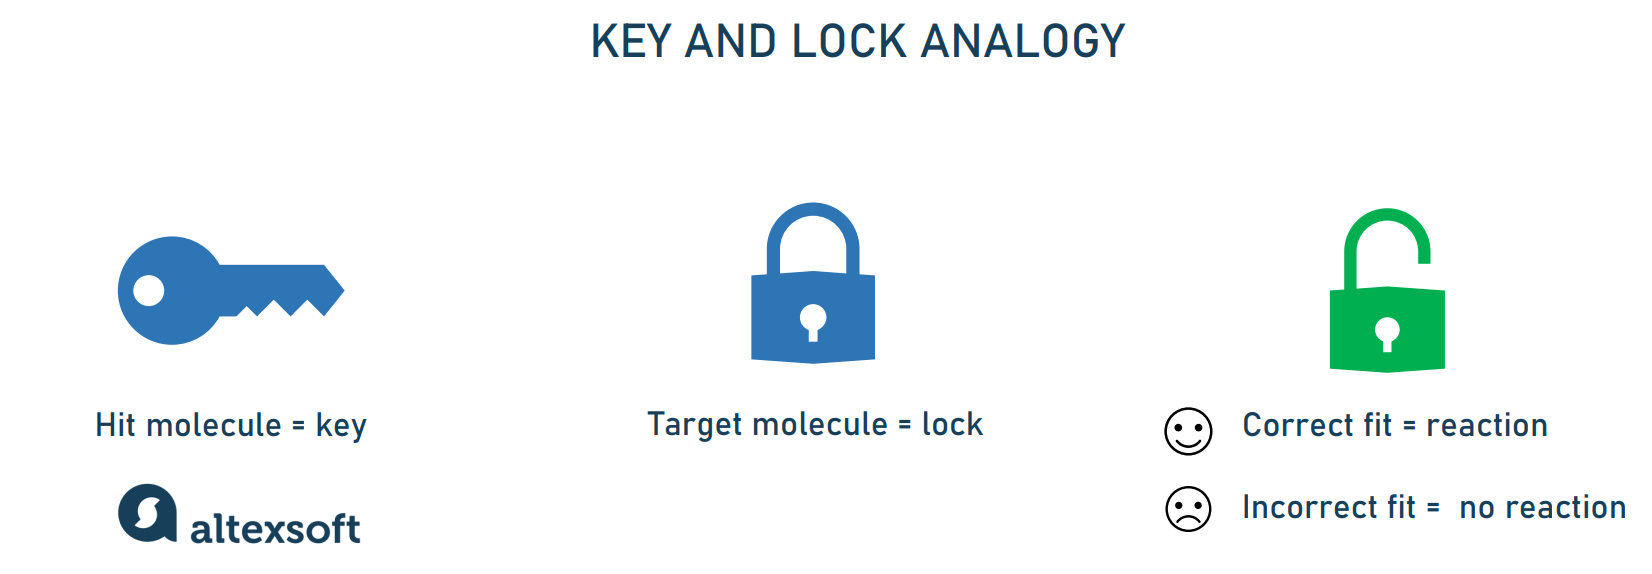 Key and lock analogy in drug discovery. 